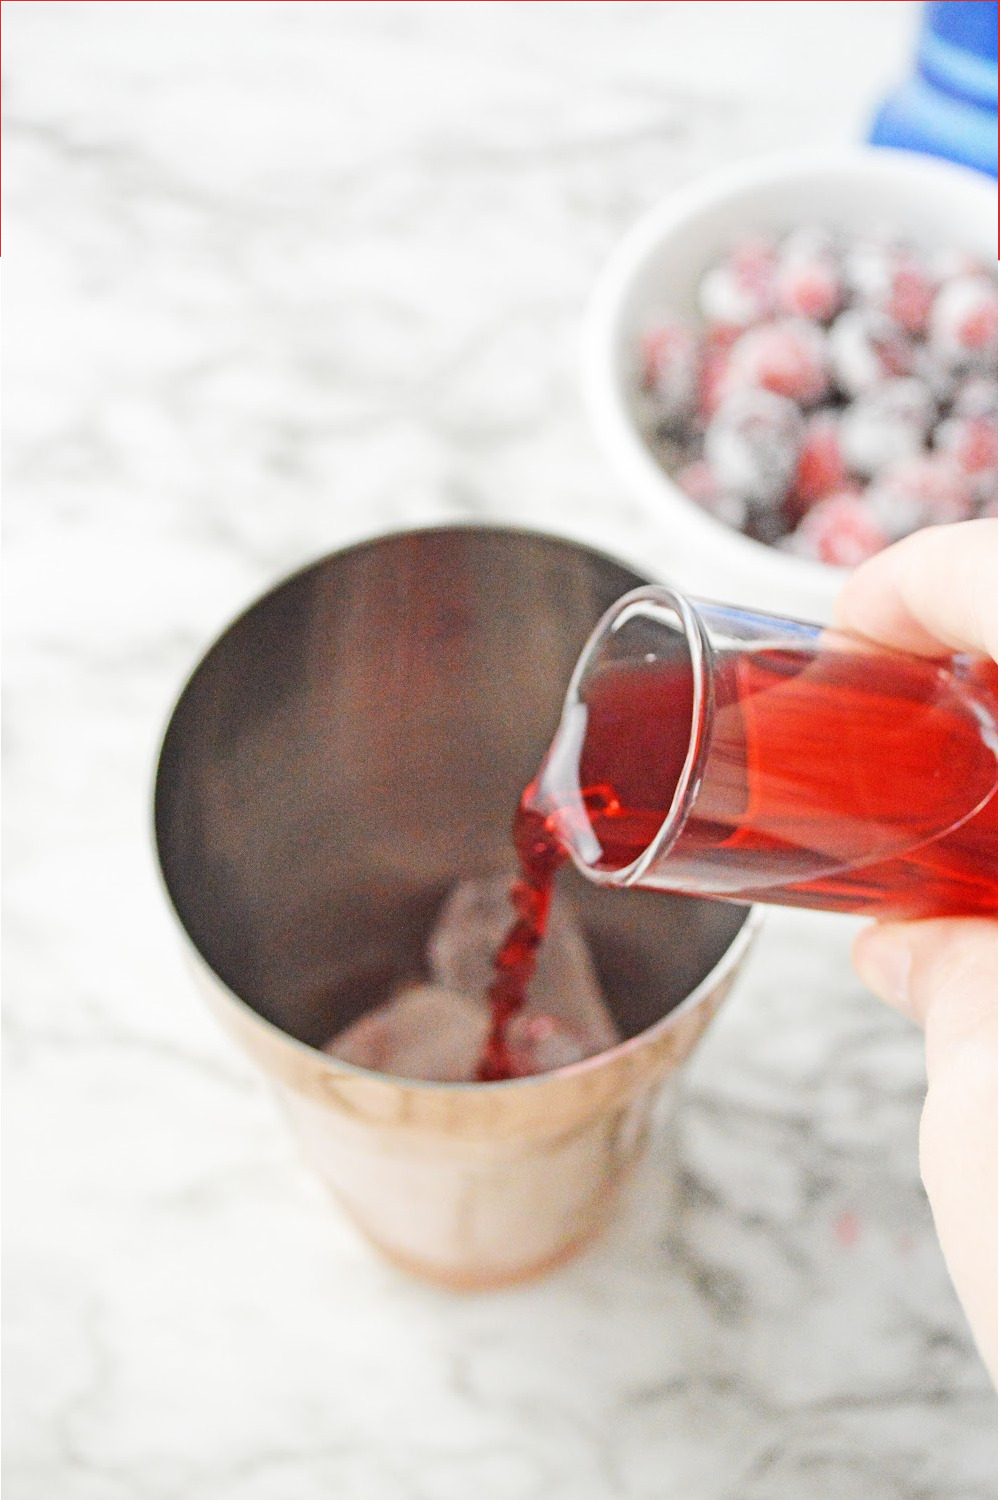 Add in cranberry juice to a martini shaker.